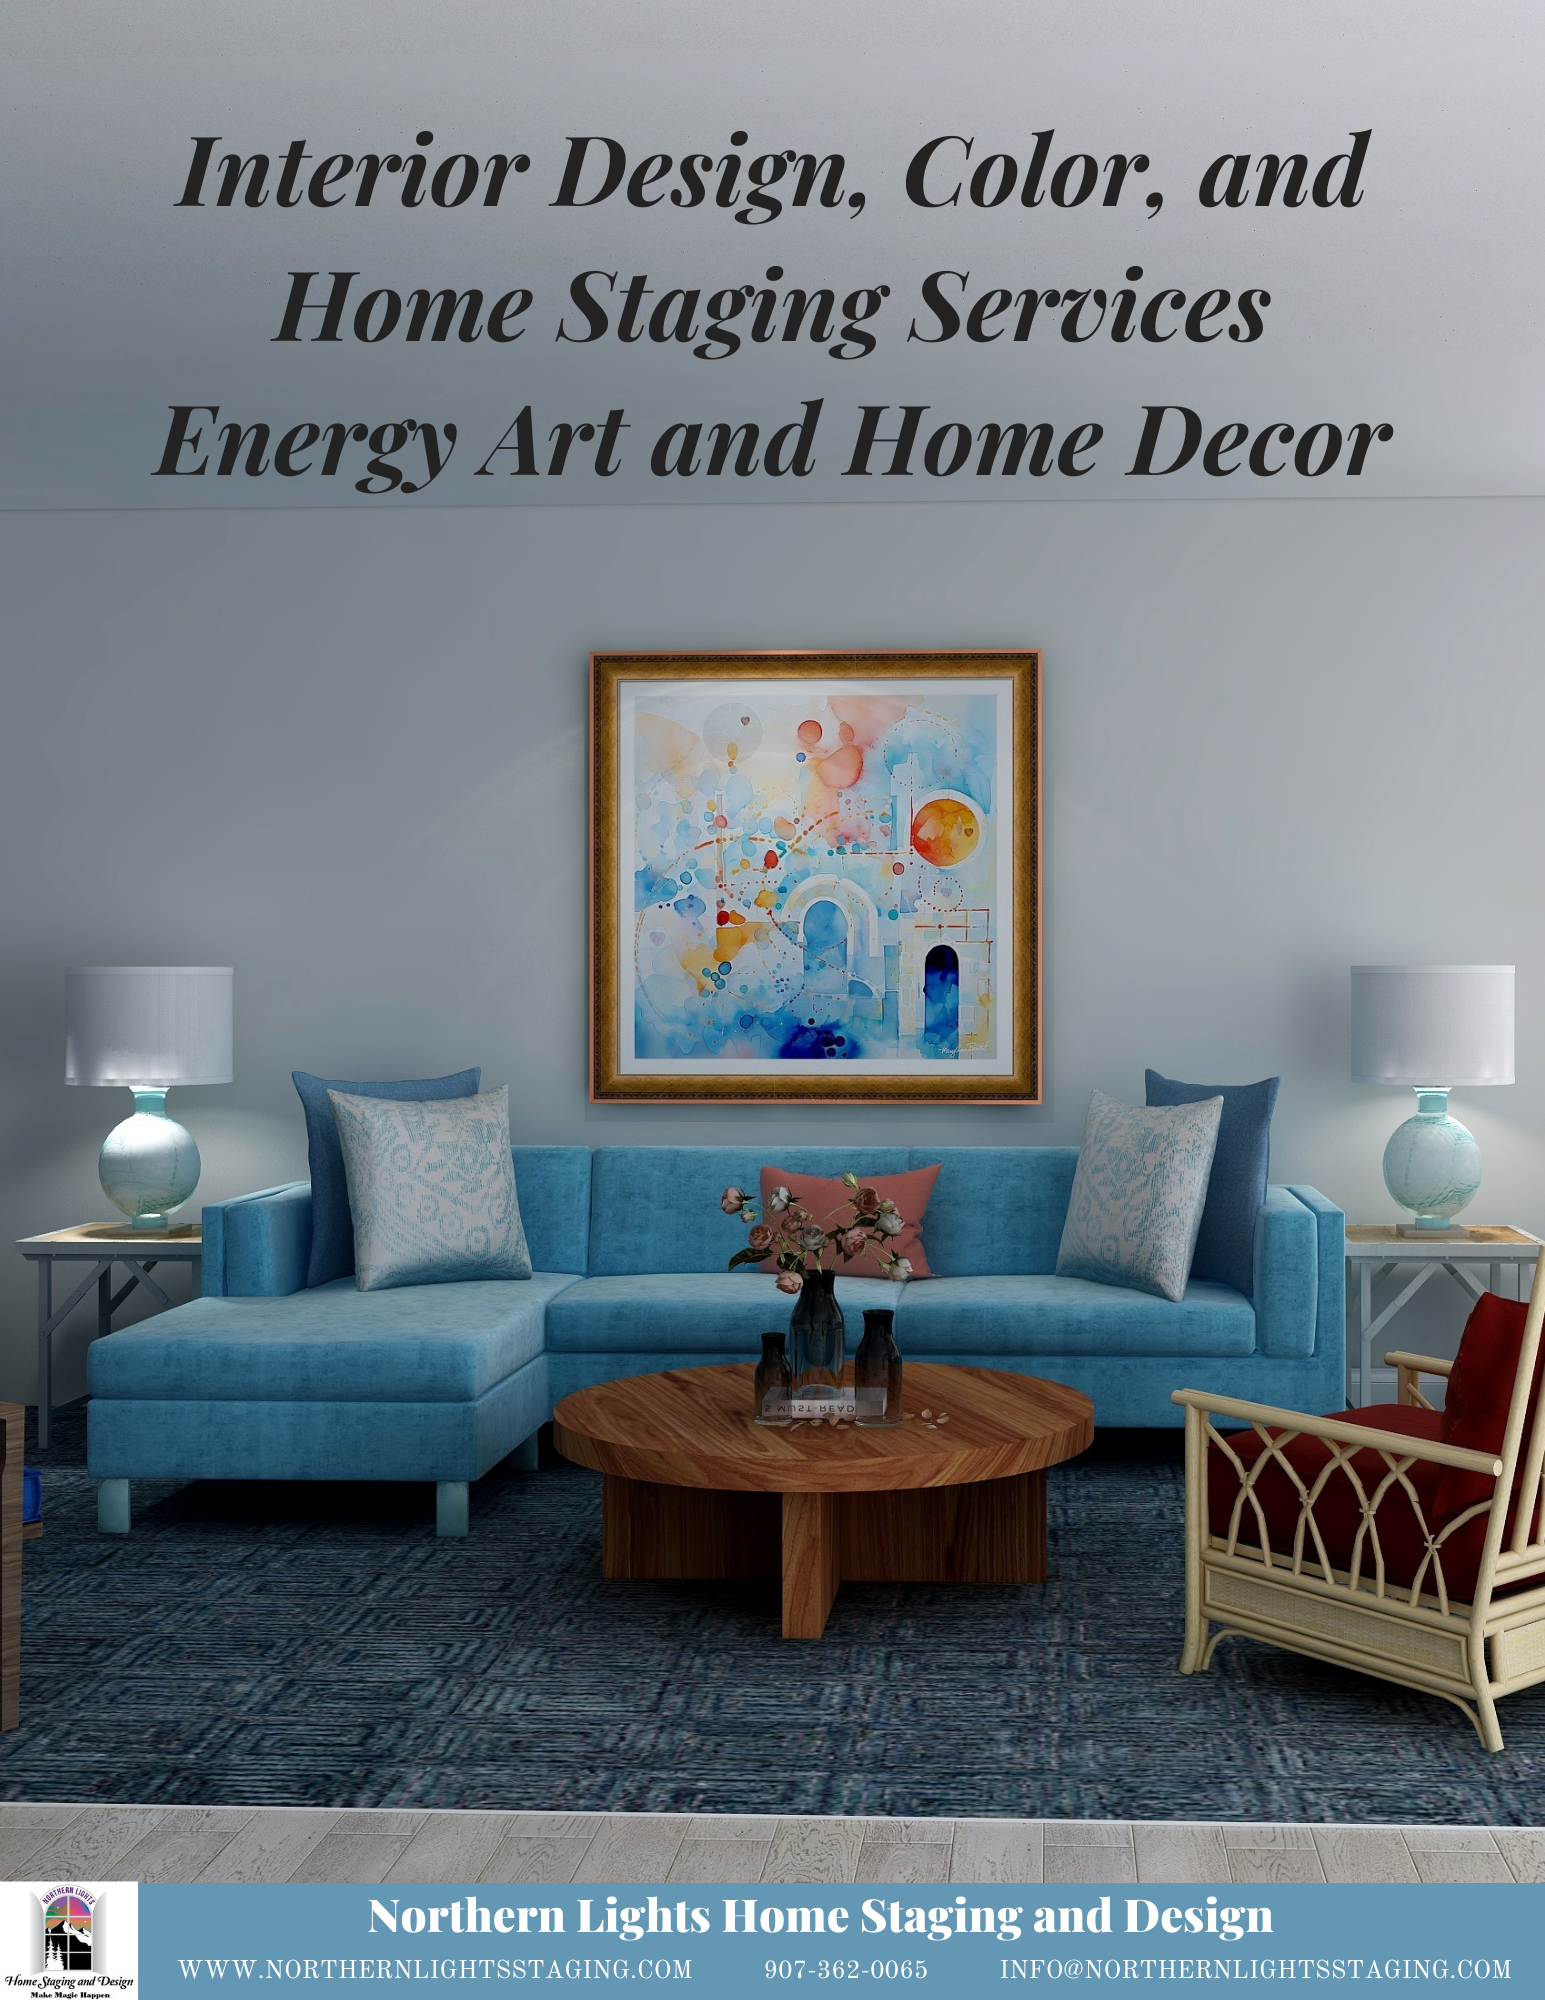 Interior Design, Color and Home Staging Services. Brochure of Northern Lights Home Staging and Design